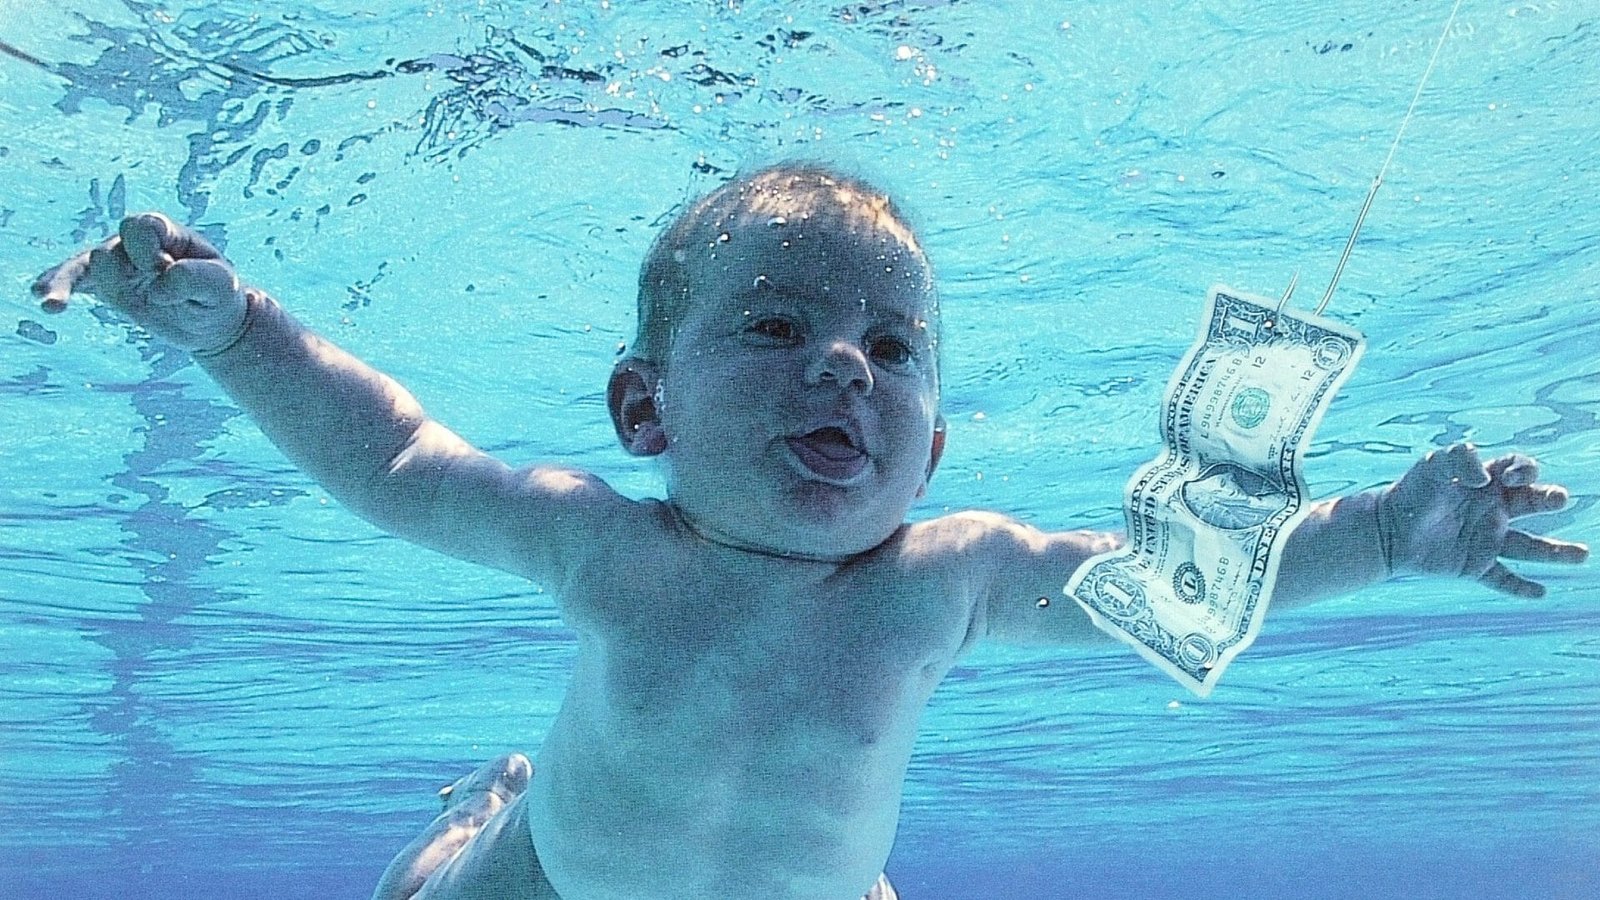 baby on nirvana nevermind cover